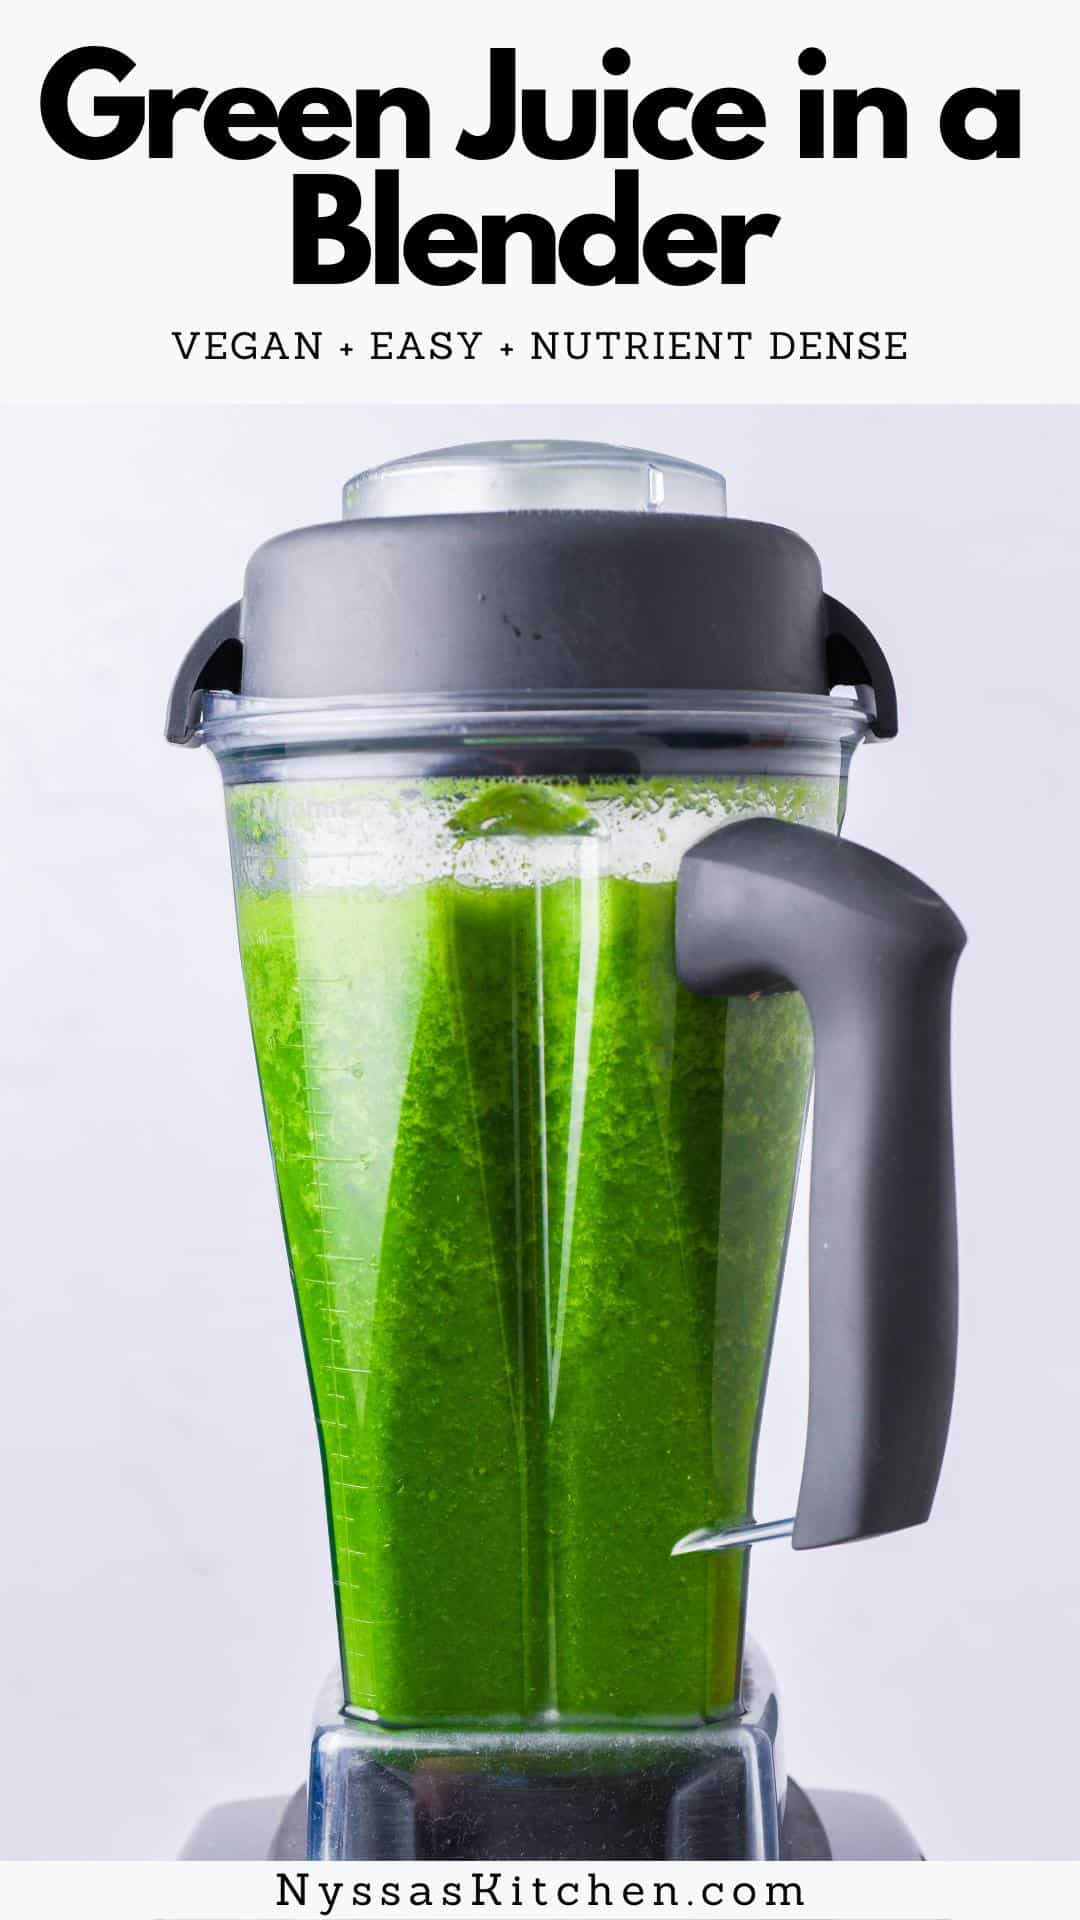 Making green juice in a blender is easier than you might think - no juicer required! This healthy green juice recipe is made with whole fruits and vegetables like kale, cucumbers, fresh mint or parsley, ginger, lemon, and apples. So nutrient dense, easy, and delicious. Vegan, gluten free, Whole30 compatible, and paleo.